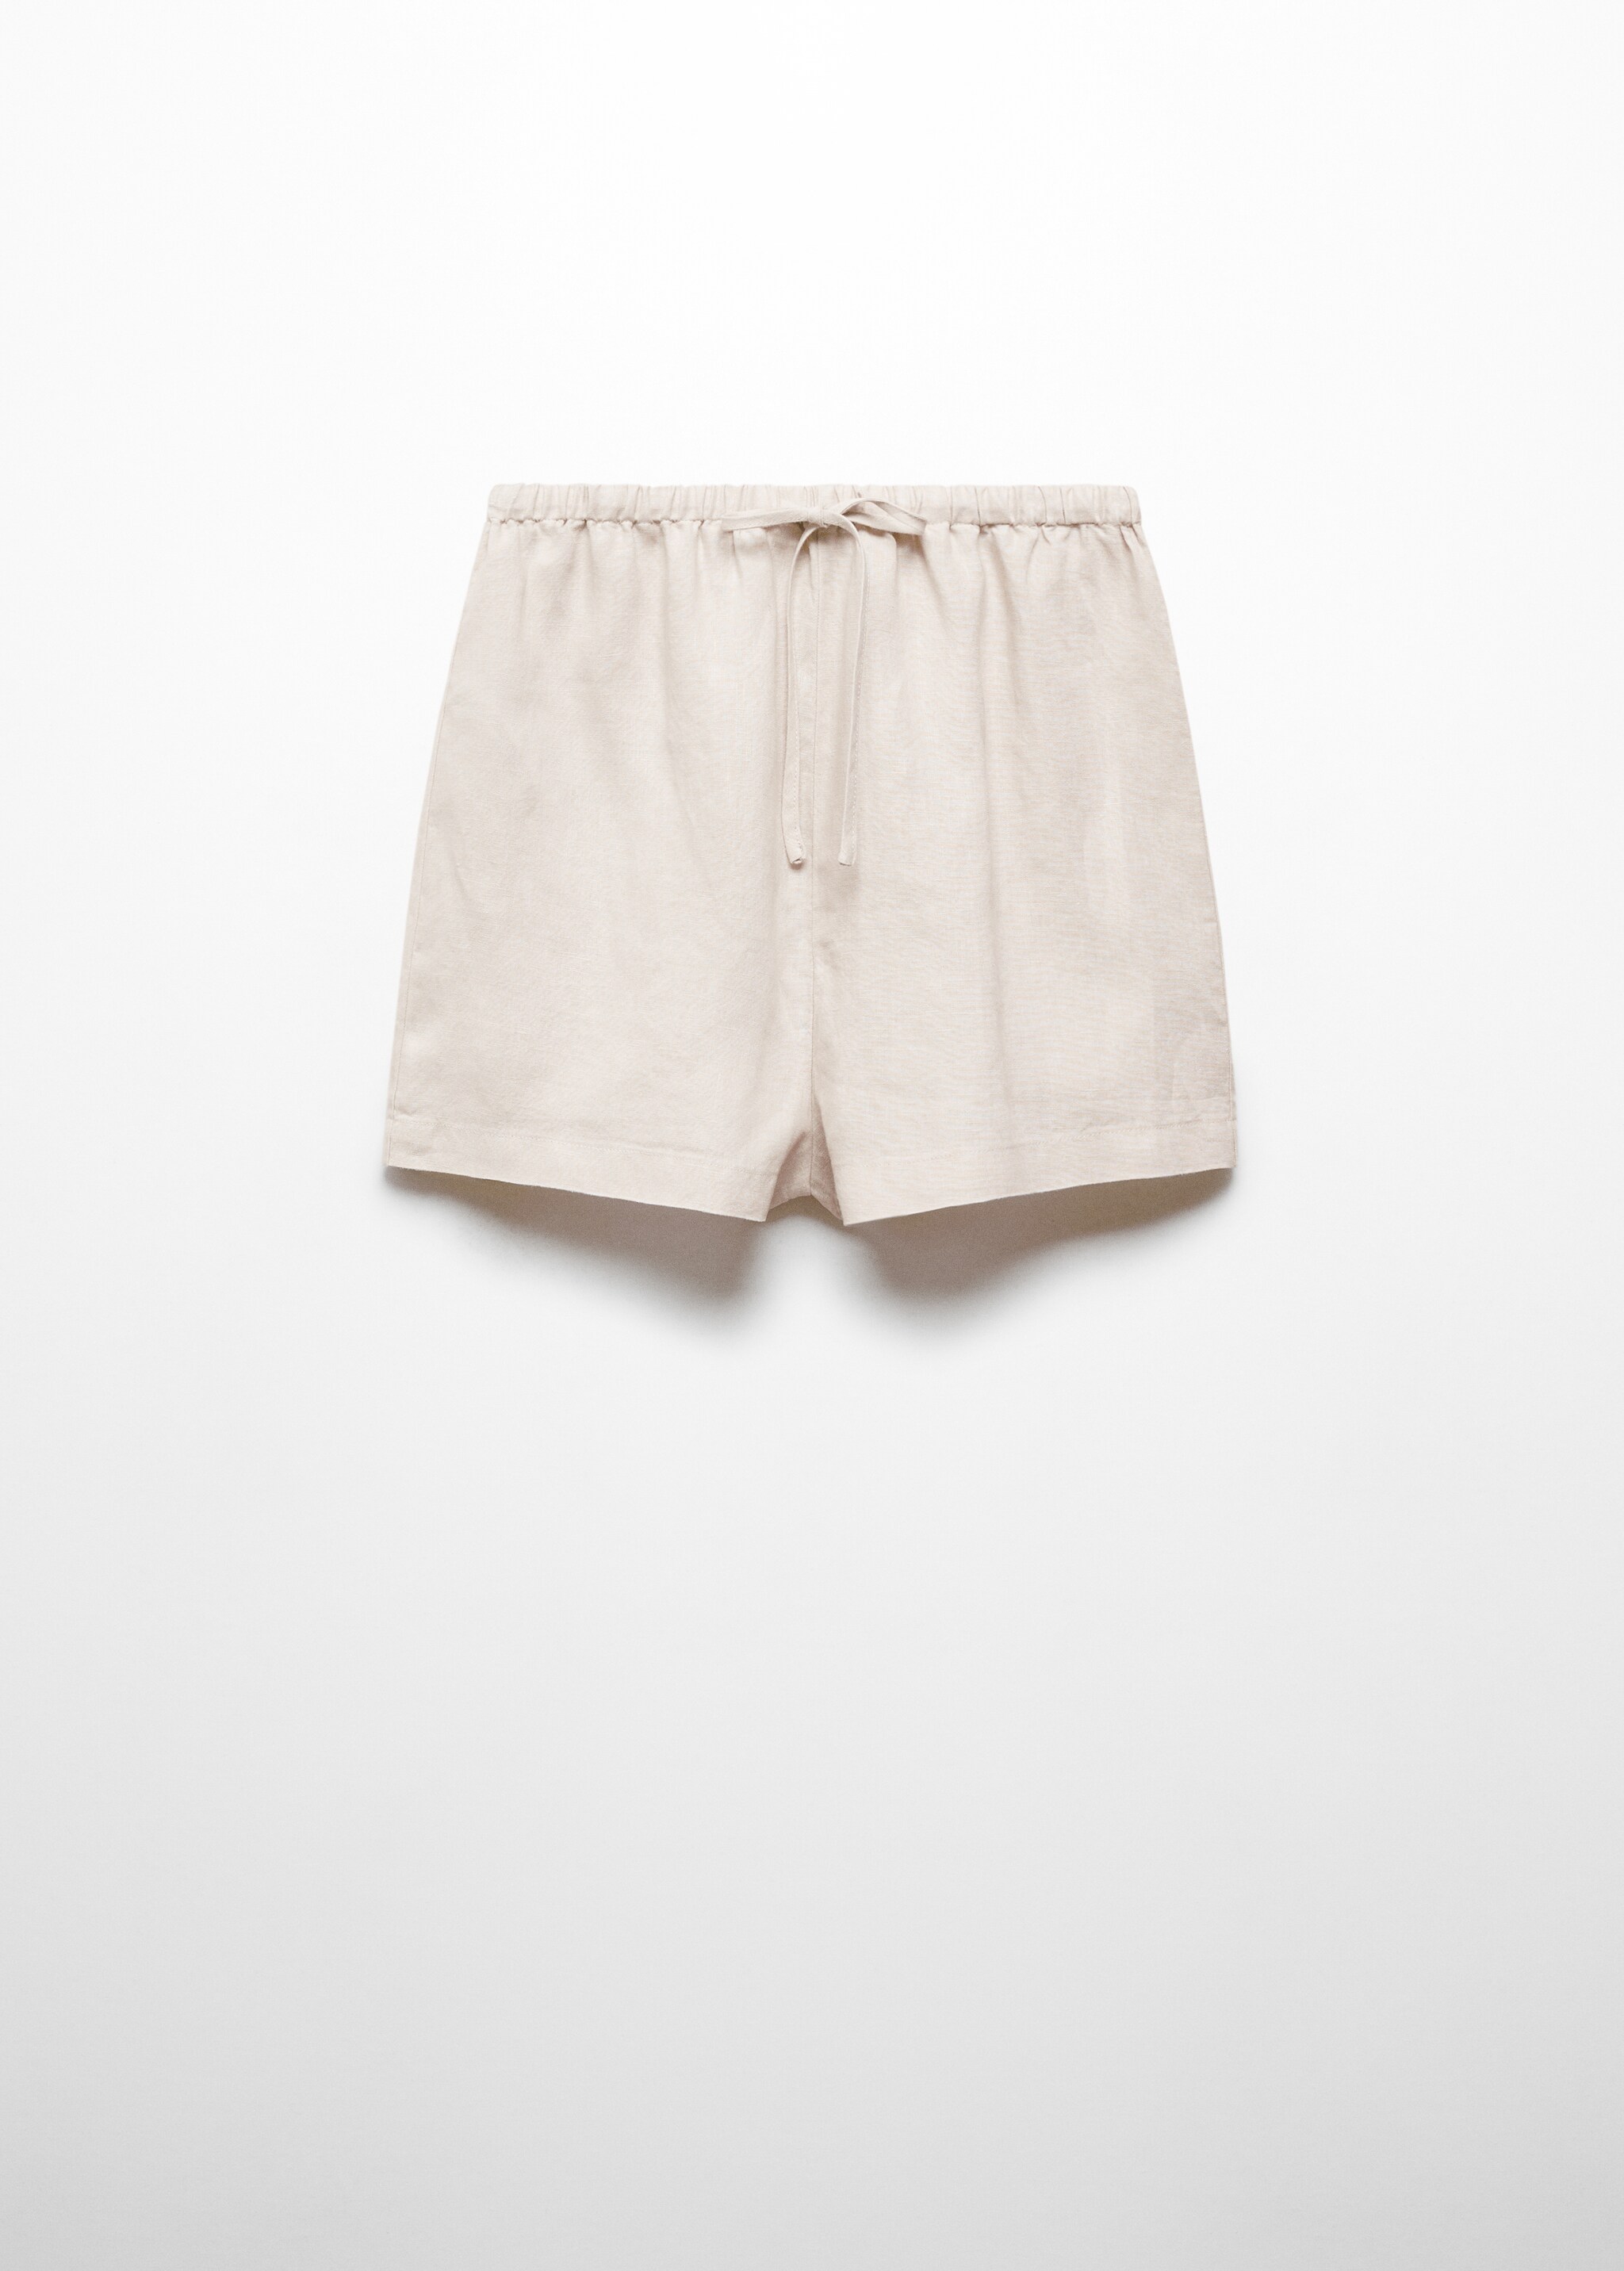 Linen pajama shorts - Article without model